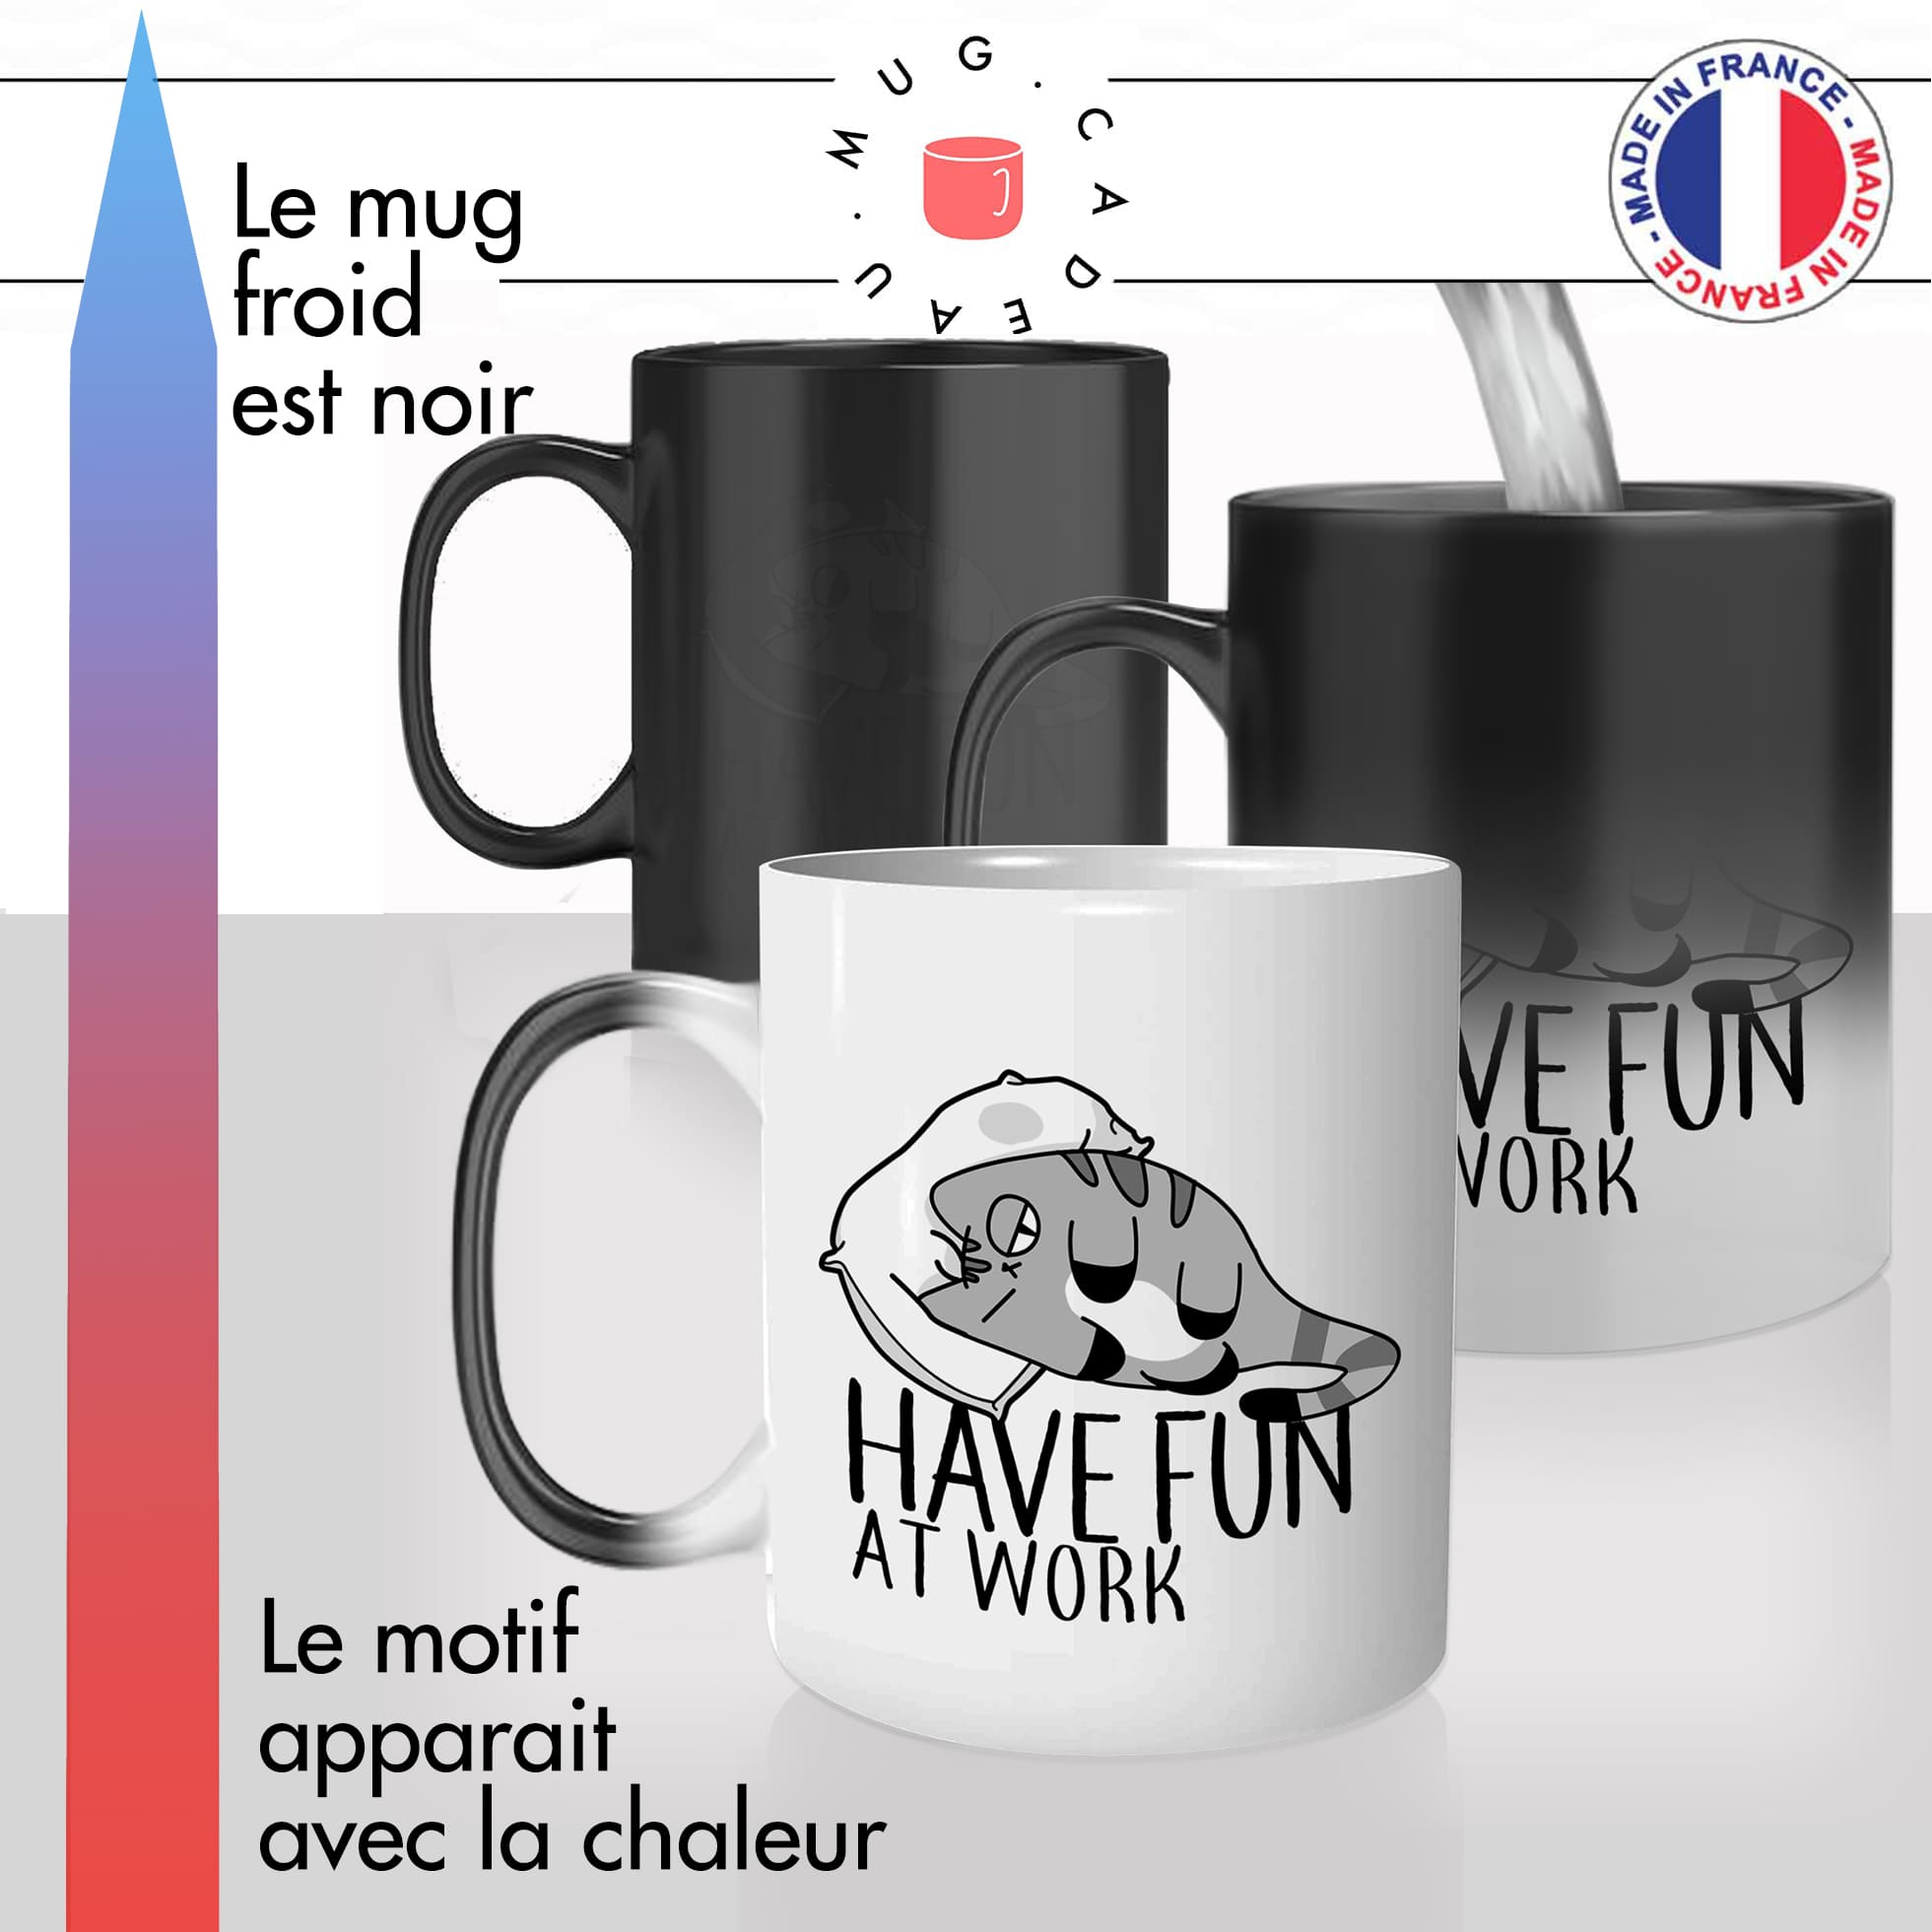 mug magique thermoreactif thermo chauffant chat sieste have fun at work travail chaton mignon idée cadeau